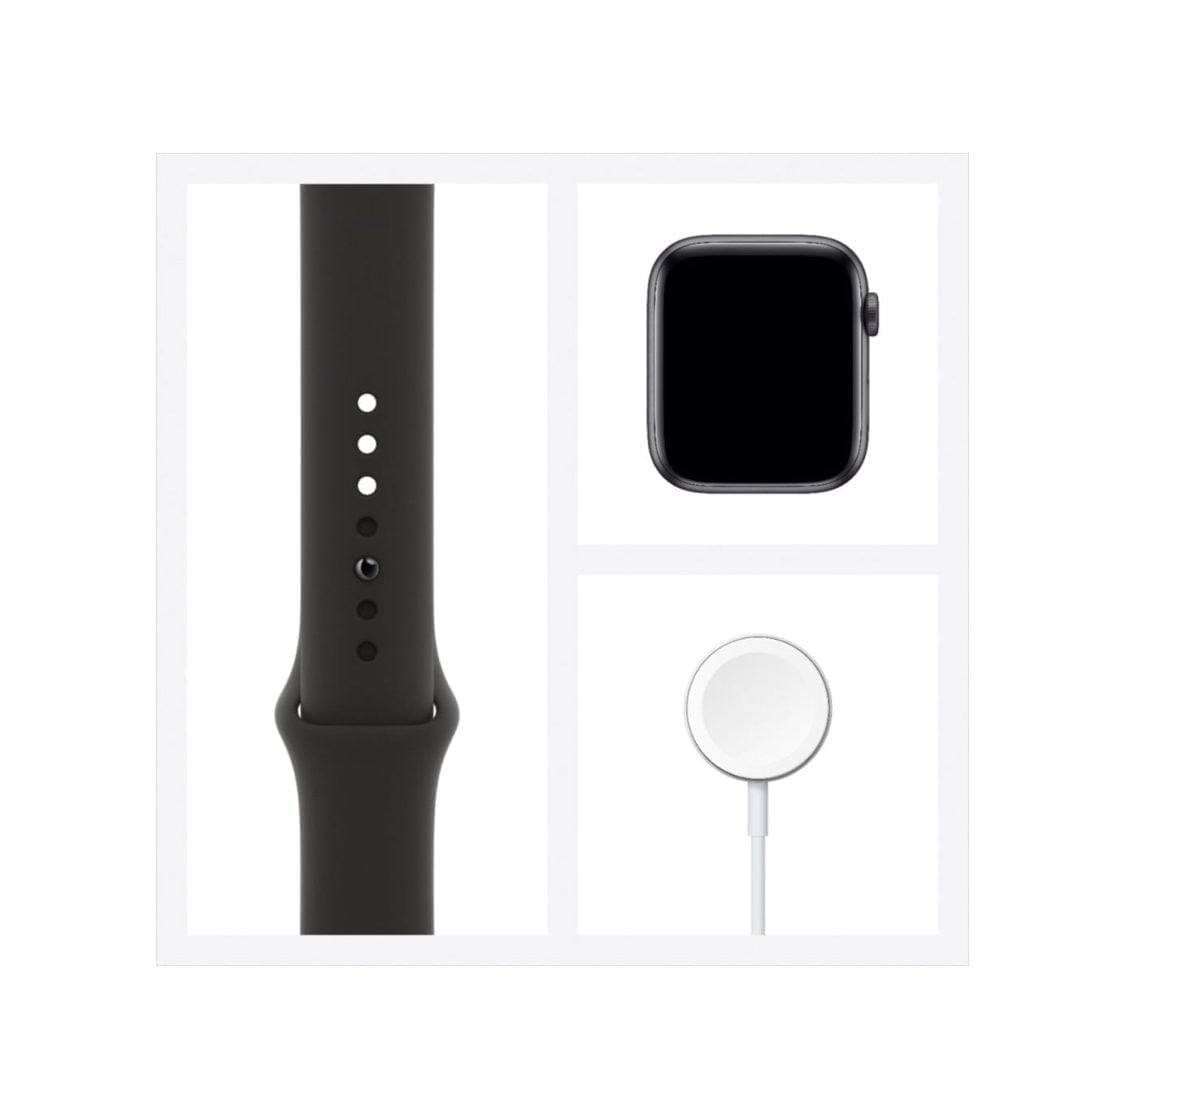 Apple &Lt;Div Class=&Quot;Sku-Title&Quot;&Gt; &Lt;H1 Class=&Quot;Heading-5 V-Fw-Regular&Quot;&Gt;Apple Watch Series 6 (Gps) 44Mm Space Gray Aluminum Case With Black Sport Band - Space Gray&Lt;/H1&Gt; &Lt;/Div&Gt; &Lt;Div Class=&Quot;Long-Description-Container Body-Copy &Quot;&Gt; &Lt;Div Class=&Quot;Product-Description&Quot;&Gt;Apple Watch Series 6 Lets You Measure Your Blood Oxygen Level With A Revolutionary New Sensor And App.¹ Take An Ecg From Your Wrist.² See Your Fitness Metrics On The Enhanced Always-On Retina Display, Now 2.5X Brighter Outdoors When Your Wrist Is Down. Set A Bedtime Routine And Track Your Sleep. And Reply To Calls And Messages Right From Your Wrist. It’s The Ultimate Device For A Healthier, More Active, More Connected Life.&Lt;/Div&Gt; &Lt;/Div&Gt; Apple Watch Series 6 (Gps) 44Mm Space Grey Aluminum Case With Black Sport Band - M00H3